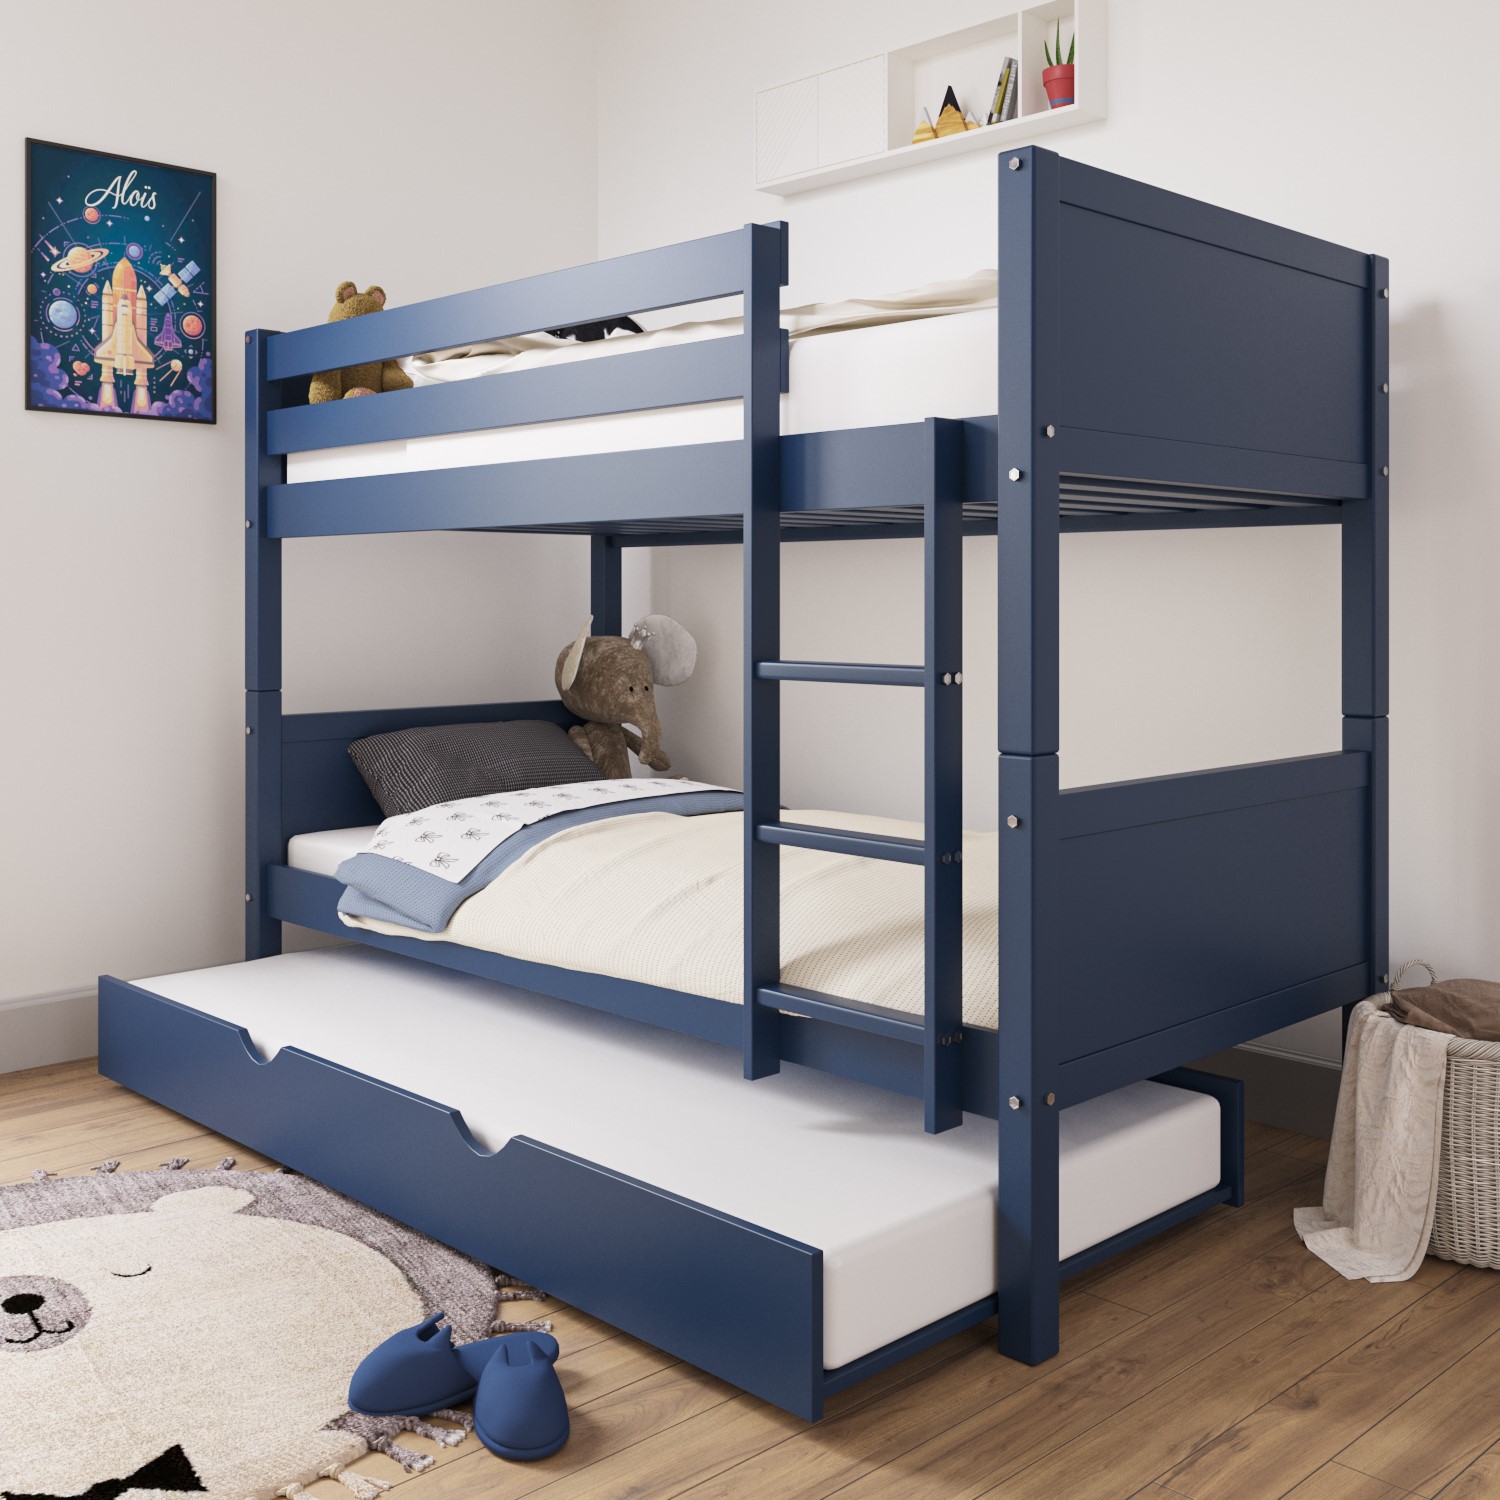 Navy Blue Wooden Bunk Bed With Trundle, Bunk Bed With Pull Out Bed